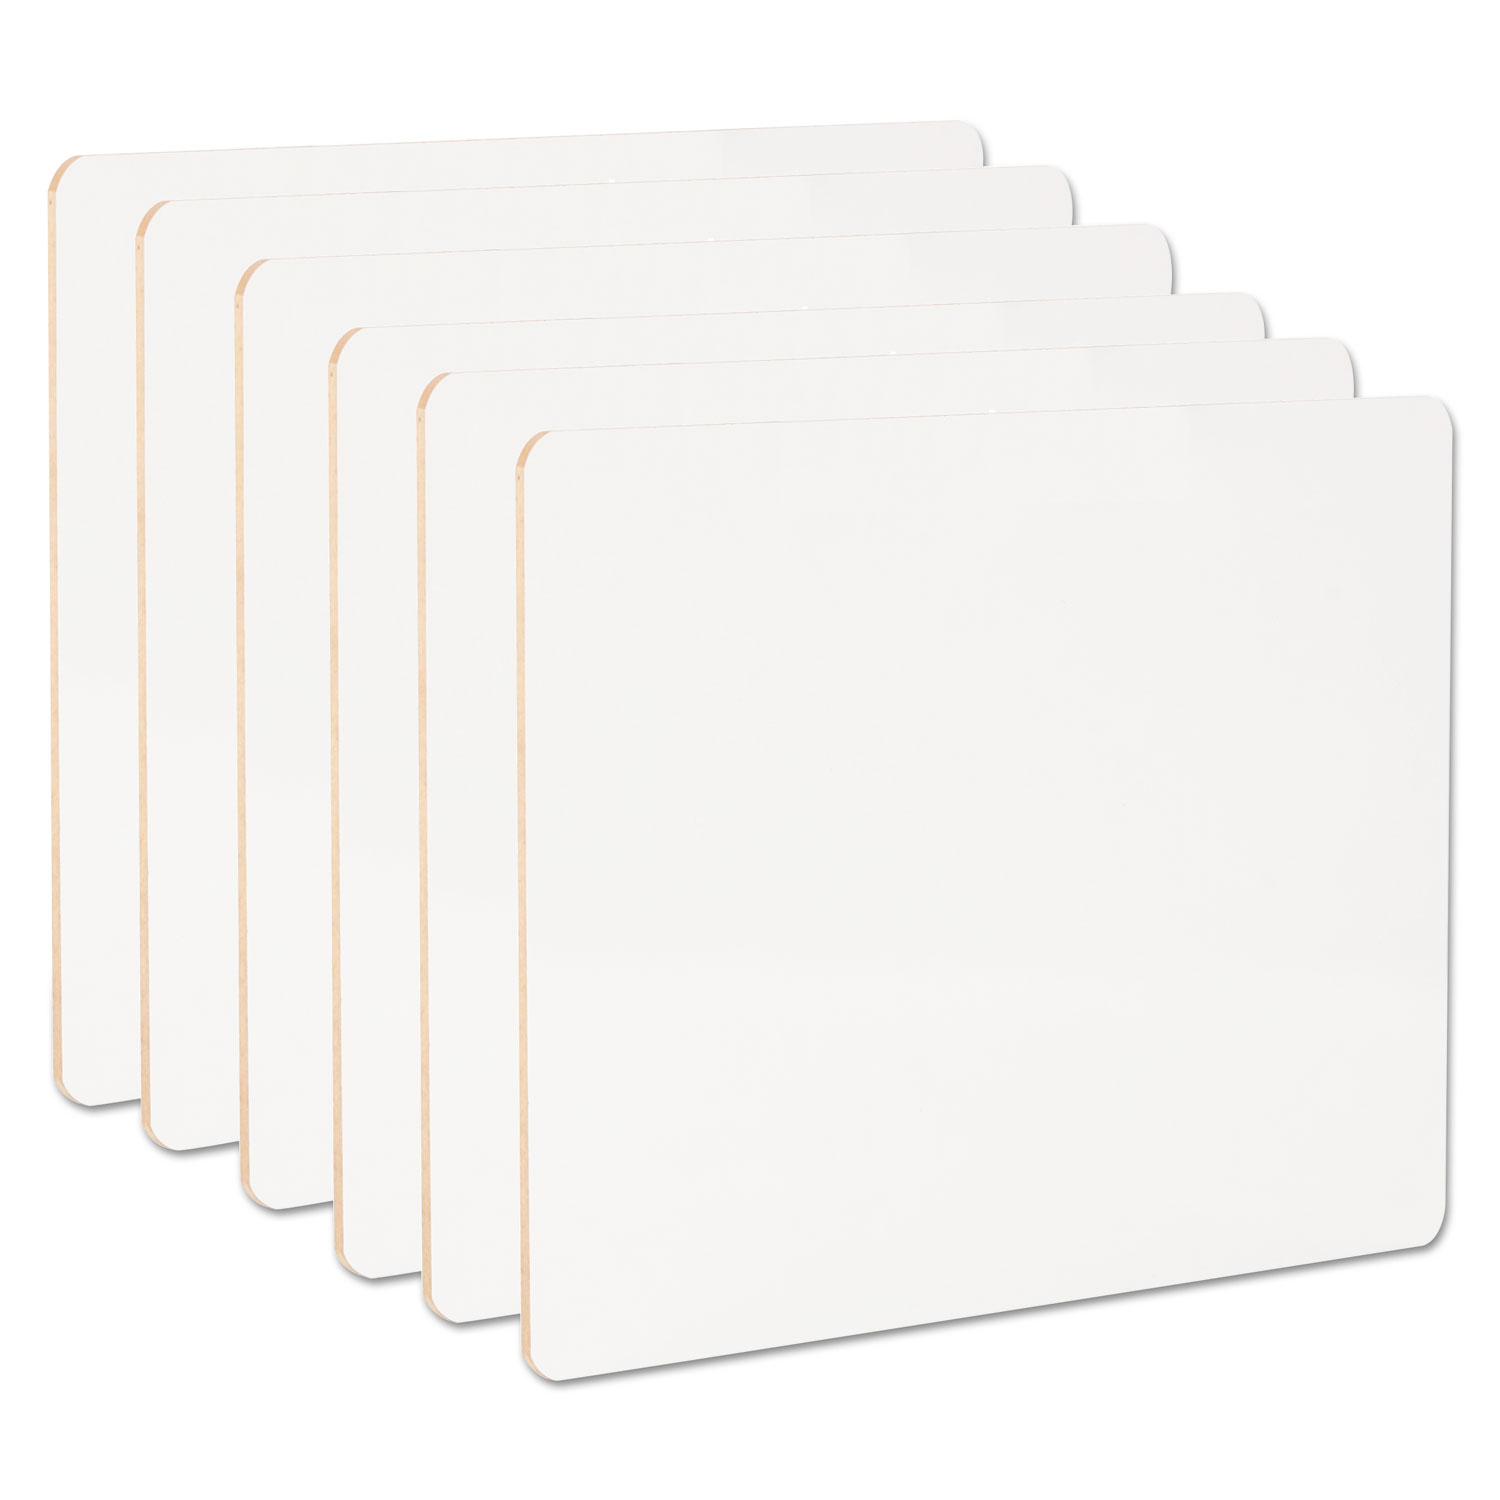 Lap/Learning Dry-Erase Board, 11 3/4 x 8 3/4, White, 6/Pack